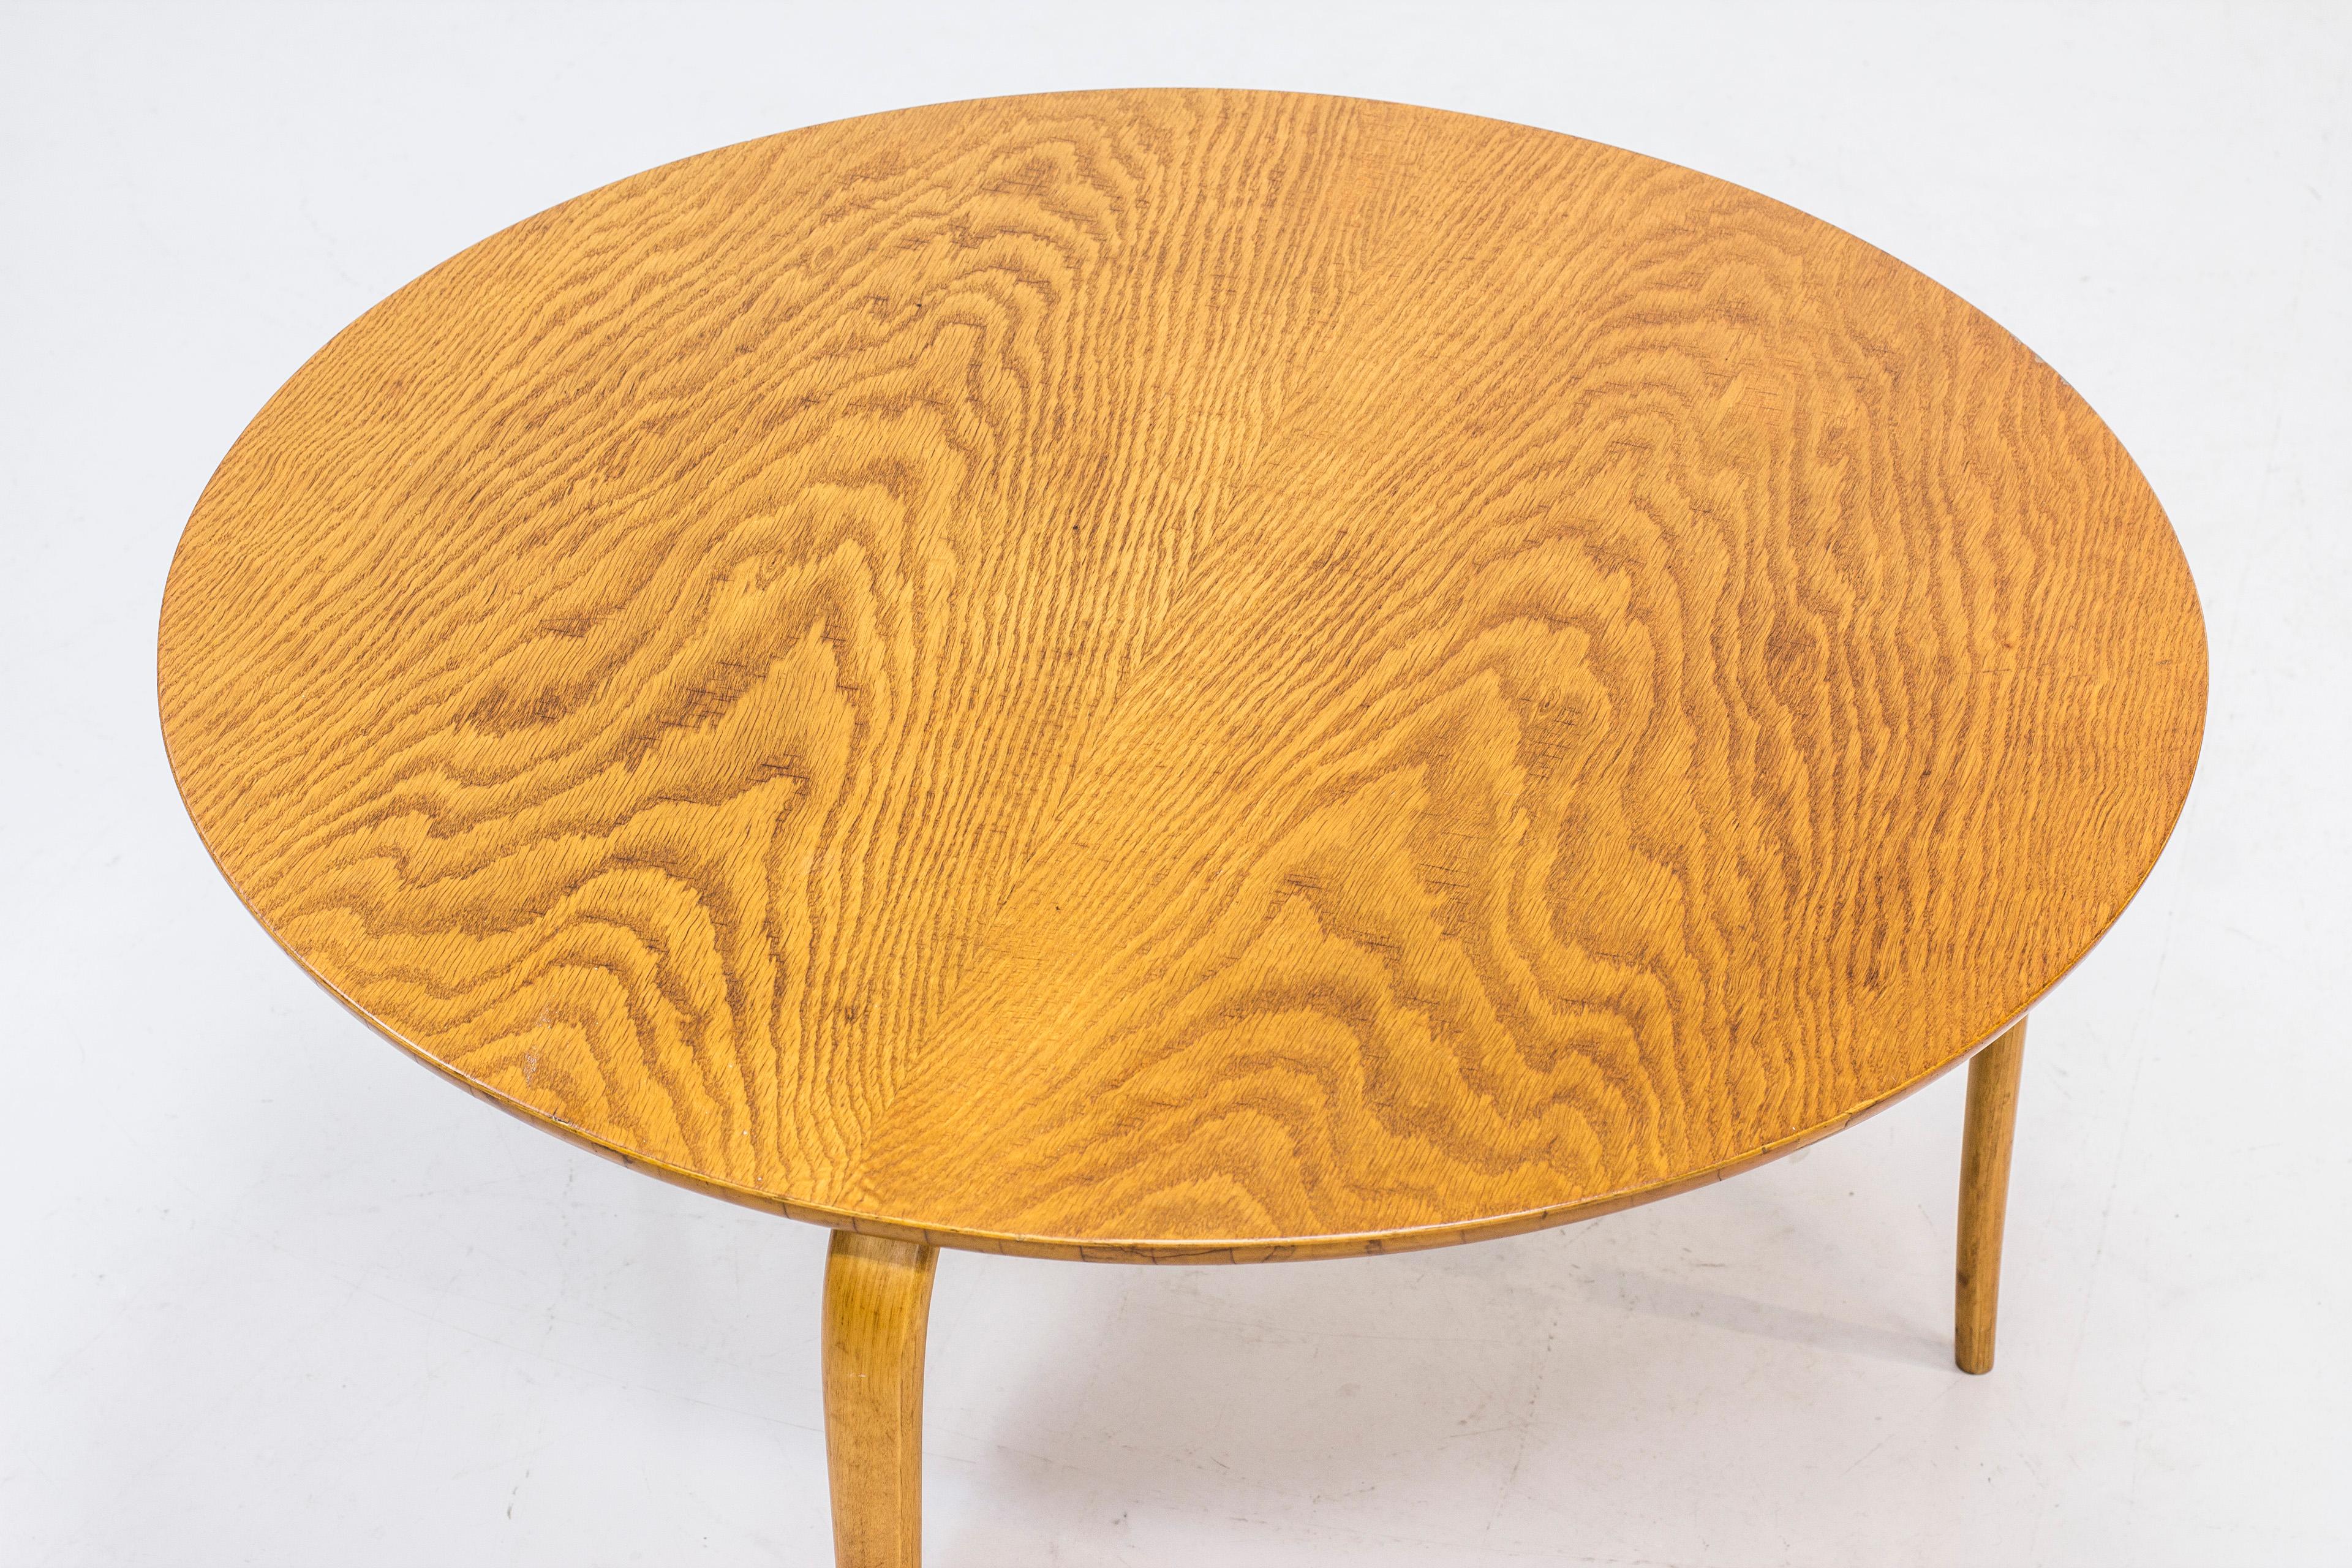 Occasional table model “Annika” by Bruno Mathsson for Karl Mathsson, Sweden. Designed in 1936, this example made during the late 1930s or early 1940s. Legs made from steam bent birch and tabletop in oak. Good vintage condition with age related marks